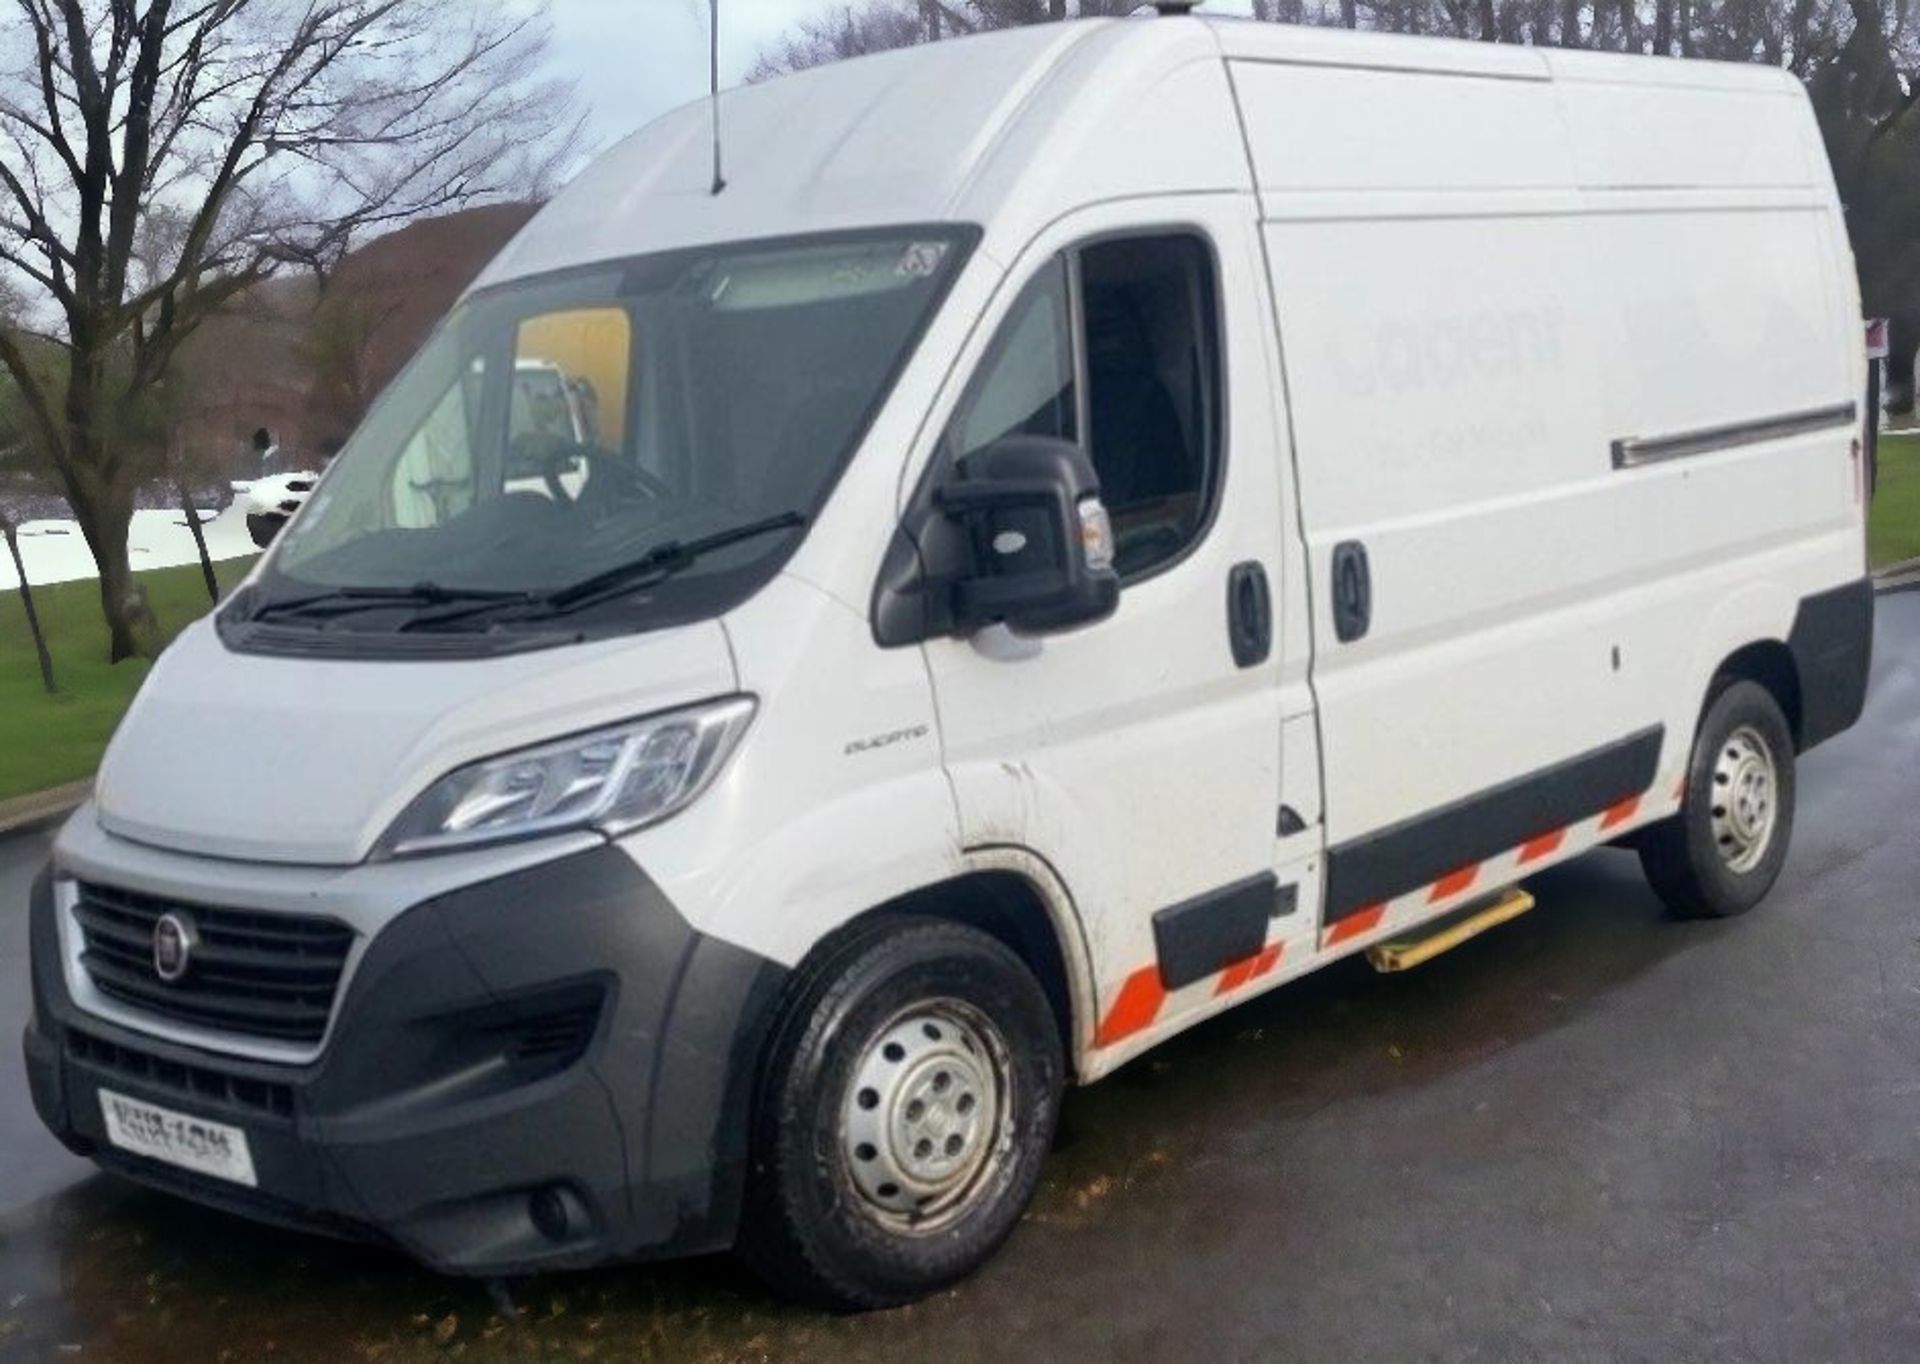 2019 FIAT DUCATO L2 MWB PANEL VAN - VERSATILE AND RELIABLE FOR YOUR BUSINESS NEEDS